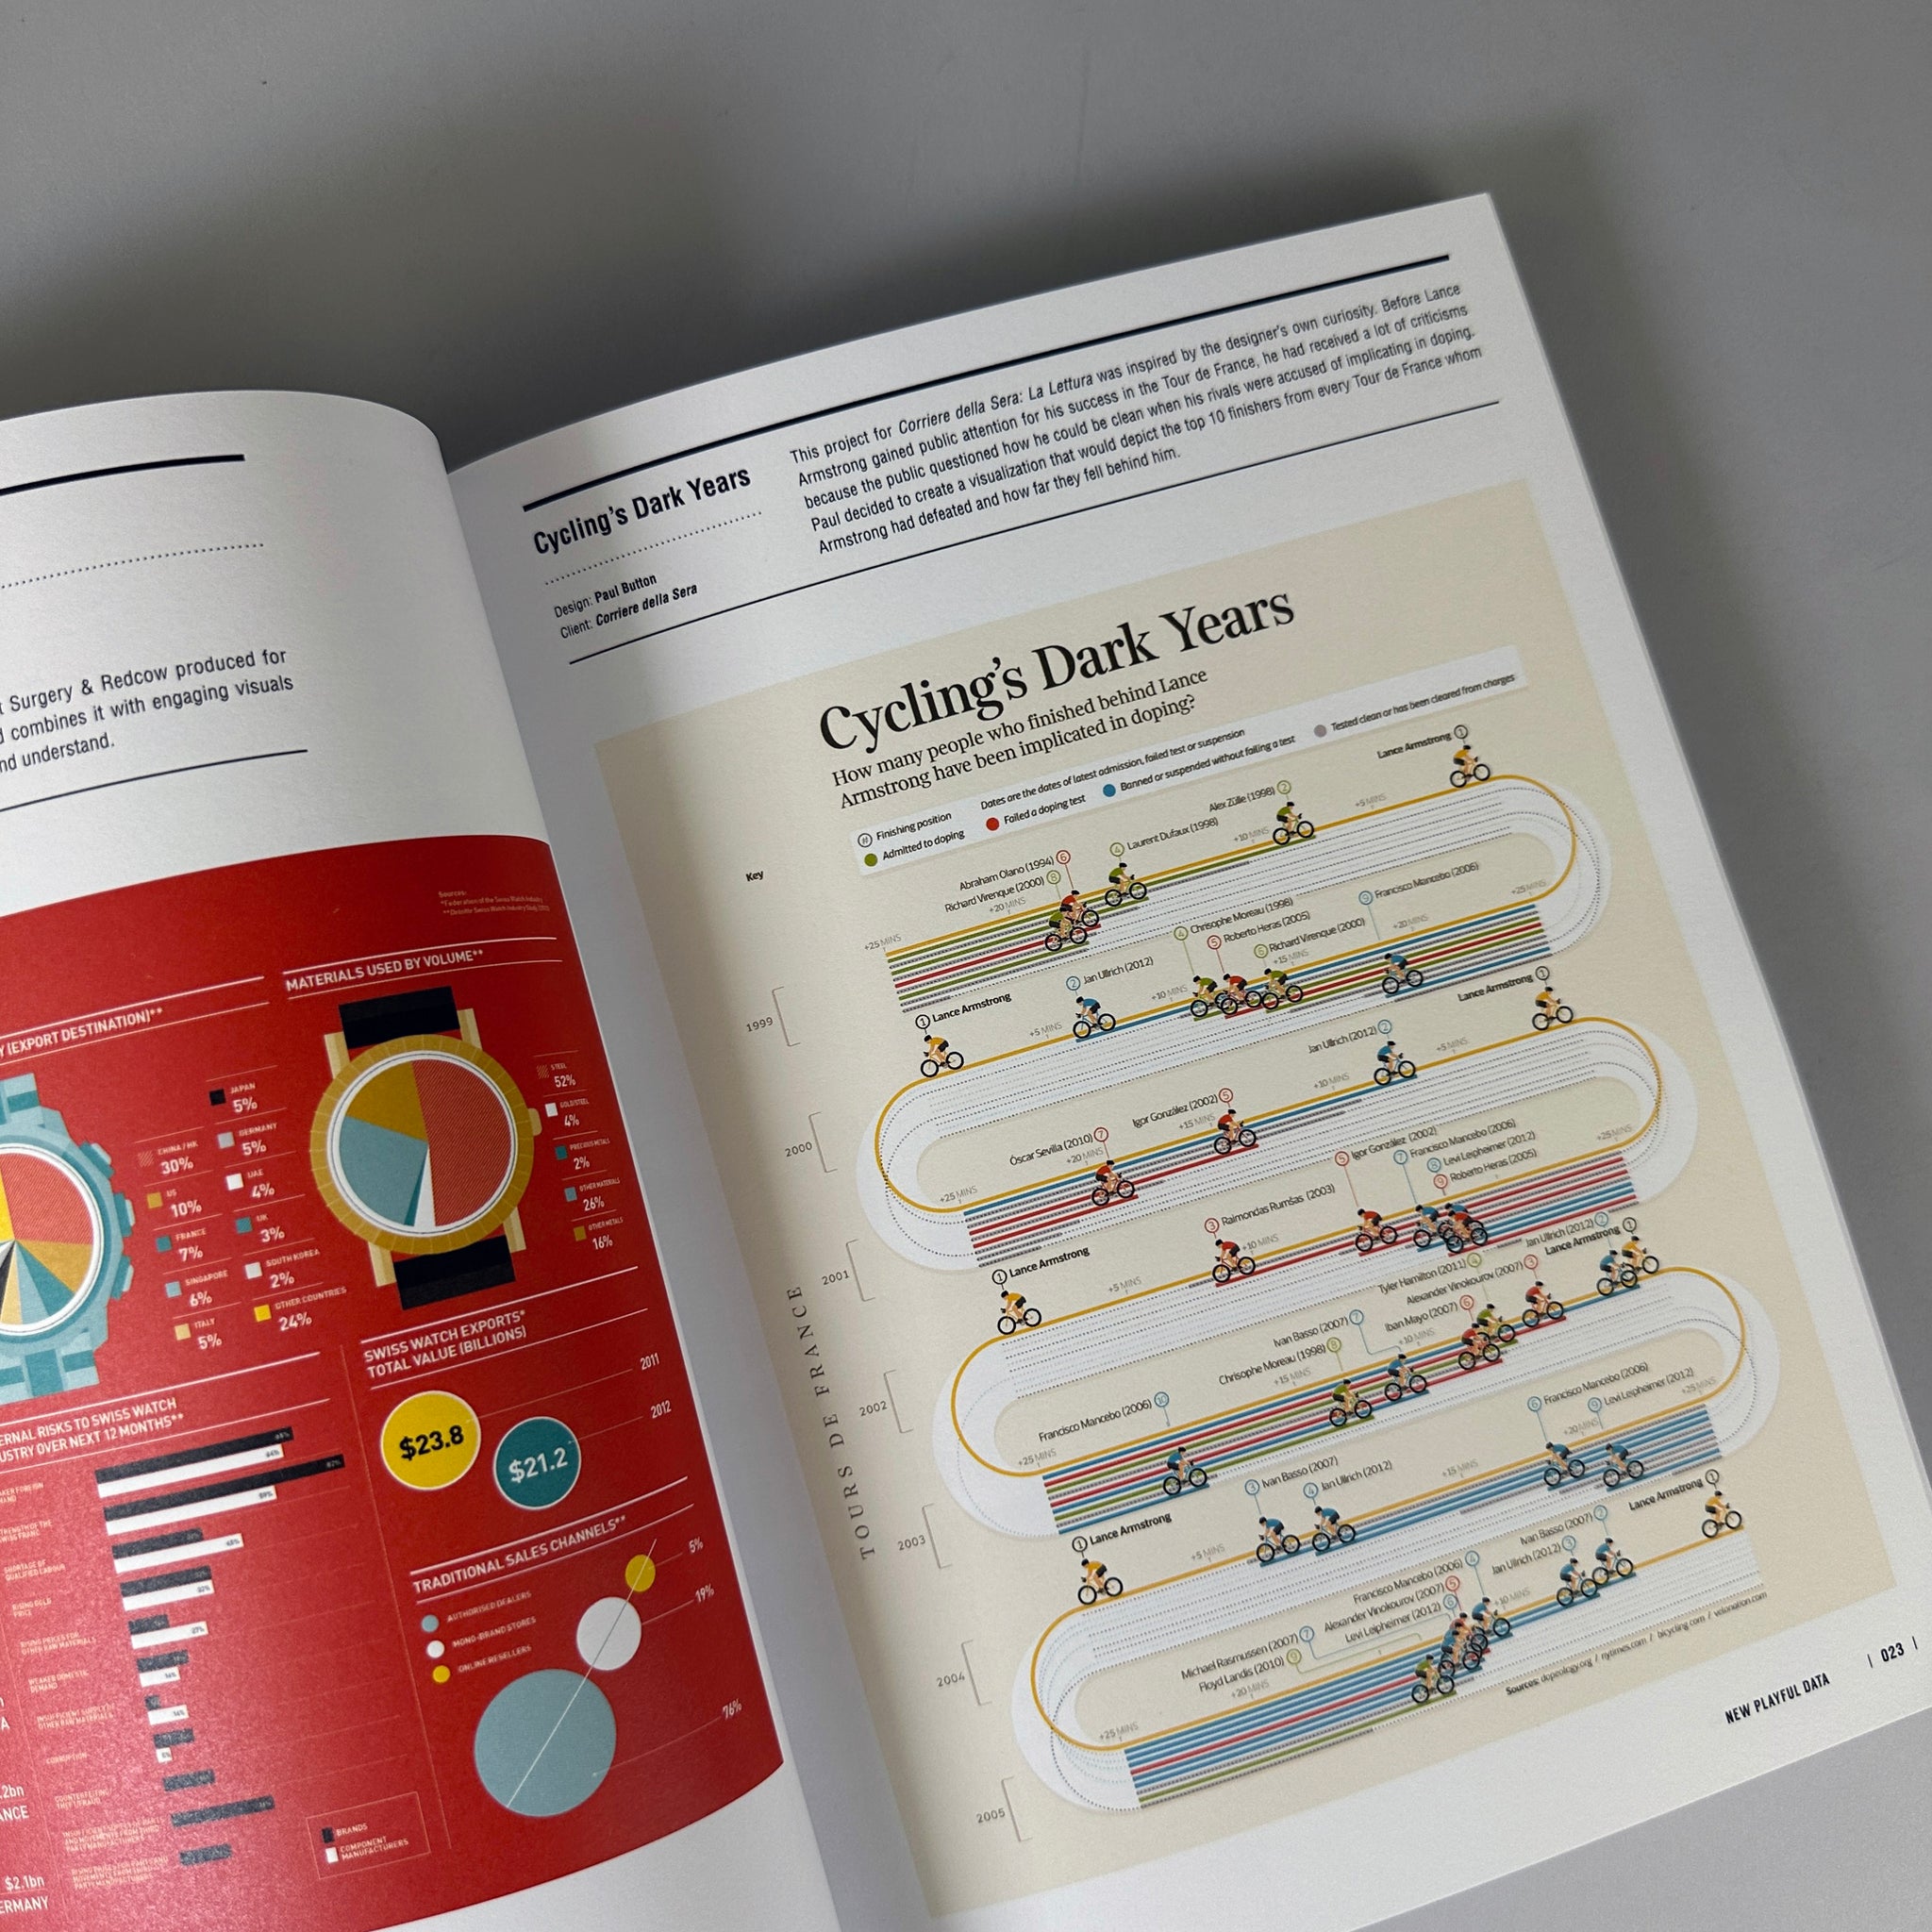 New Playful Data: Graphic Design and Illustration for Infographics